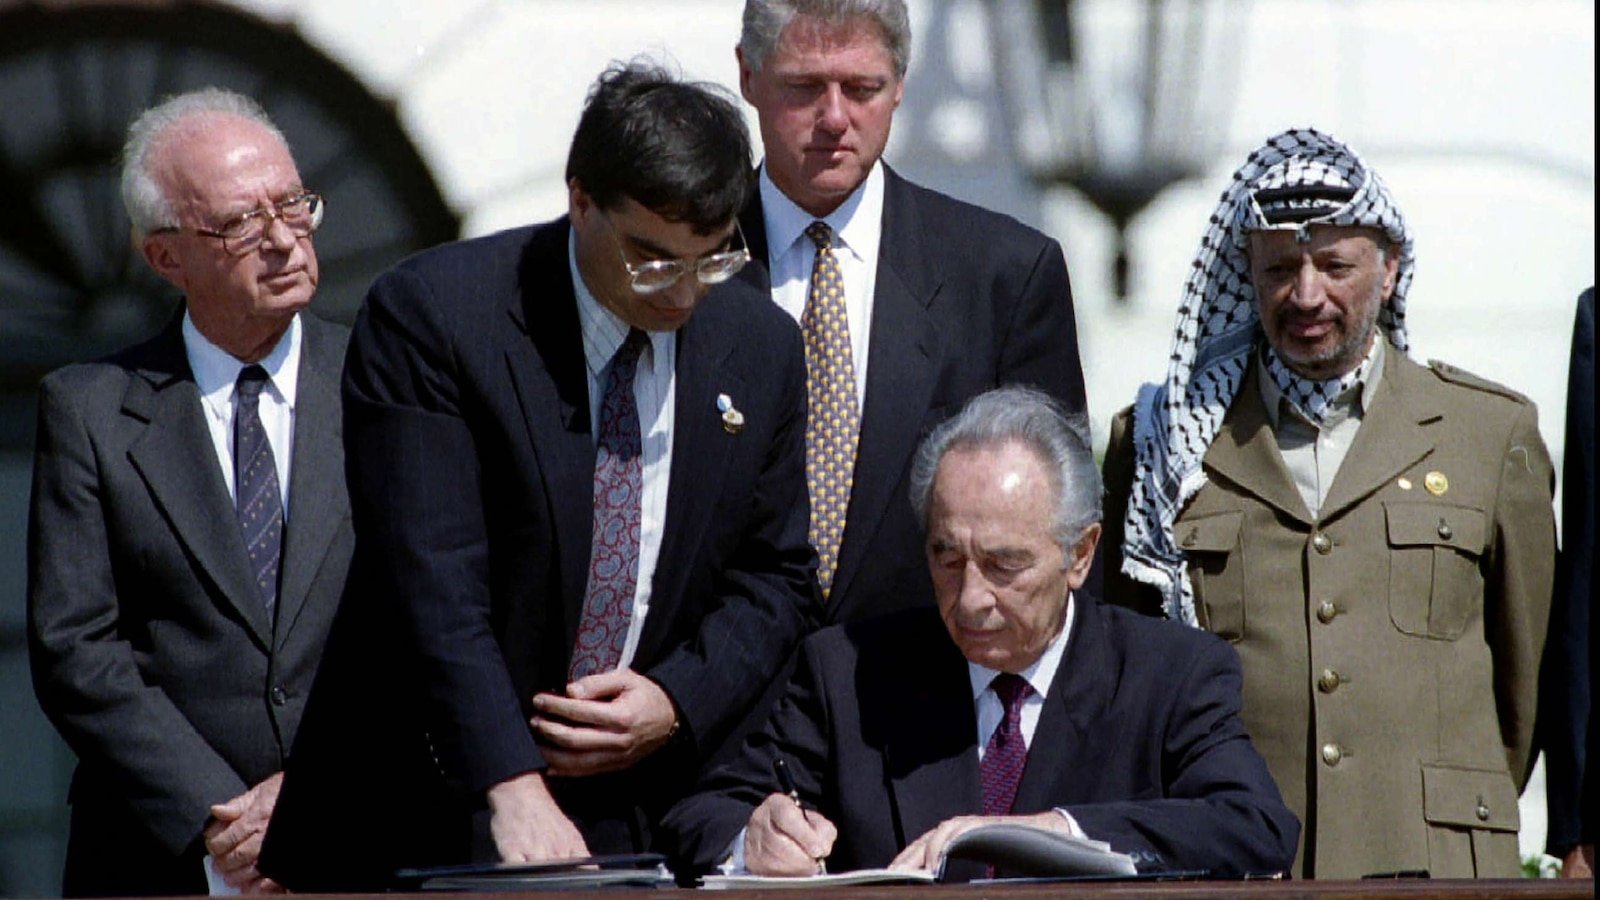 A look into the long history of the Israeli-Palestinian conflict